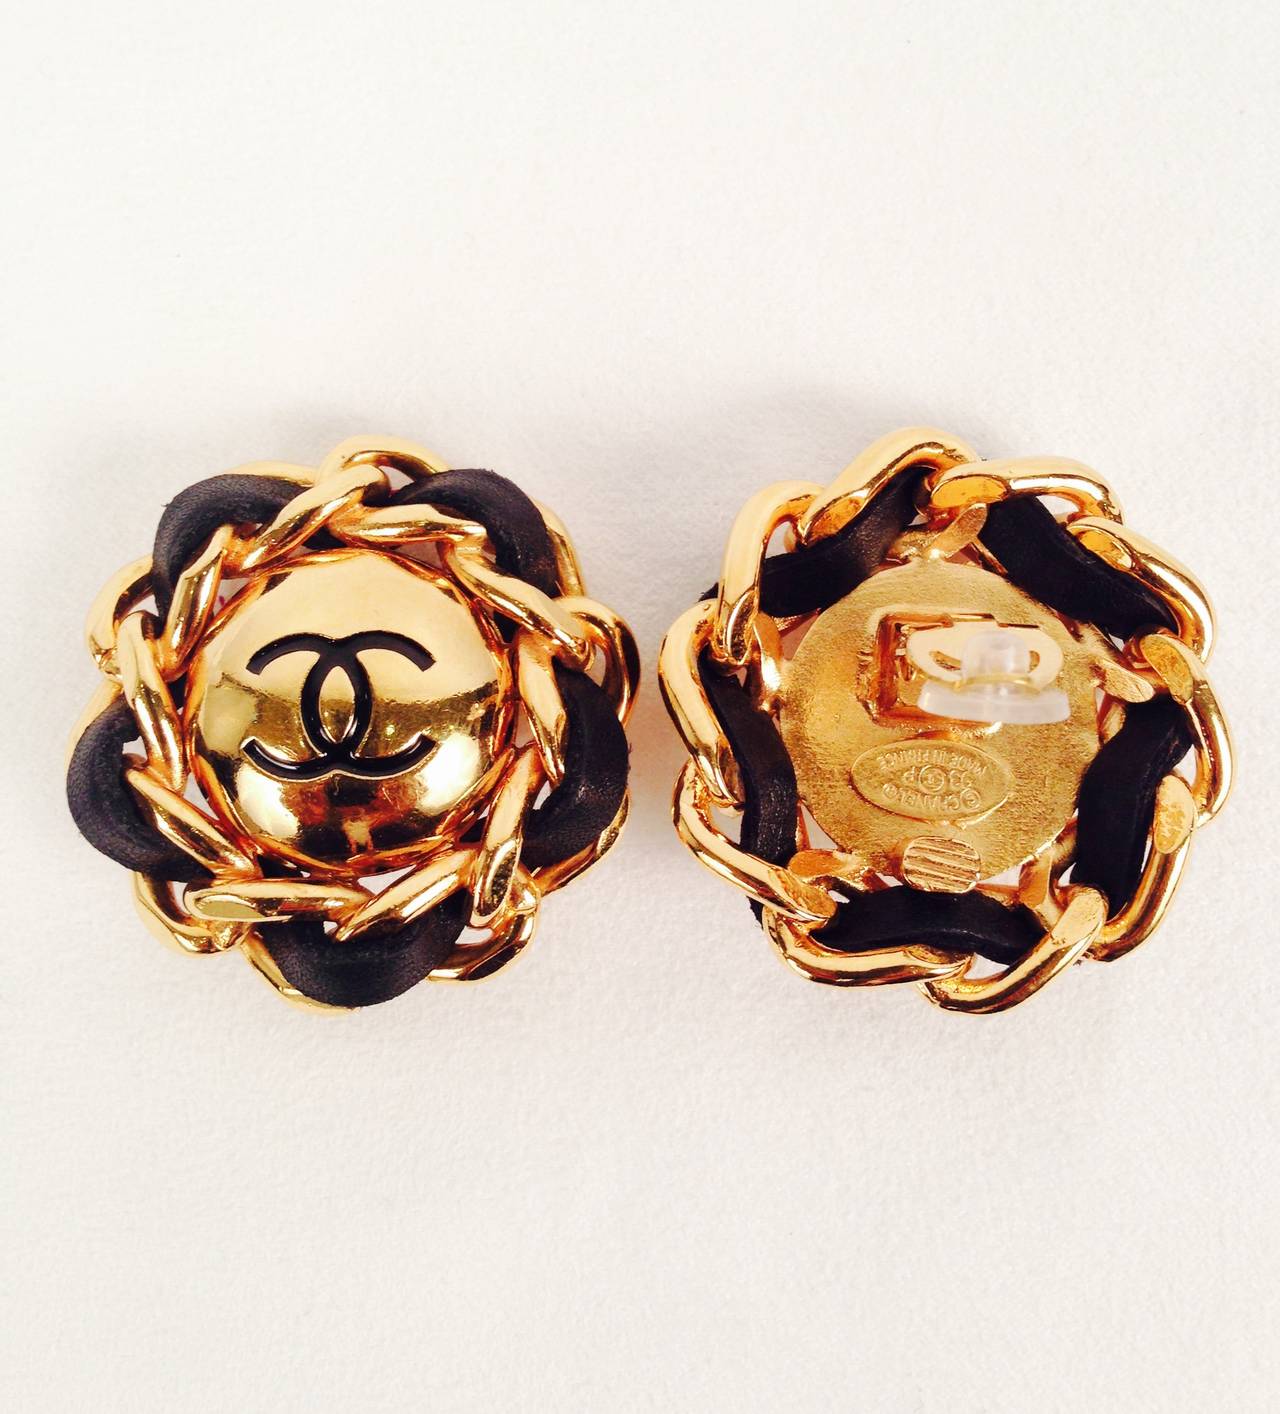 1990s Chanel Chain Clip on Earrings are collector's items from the 